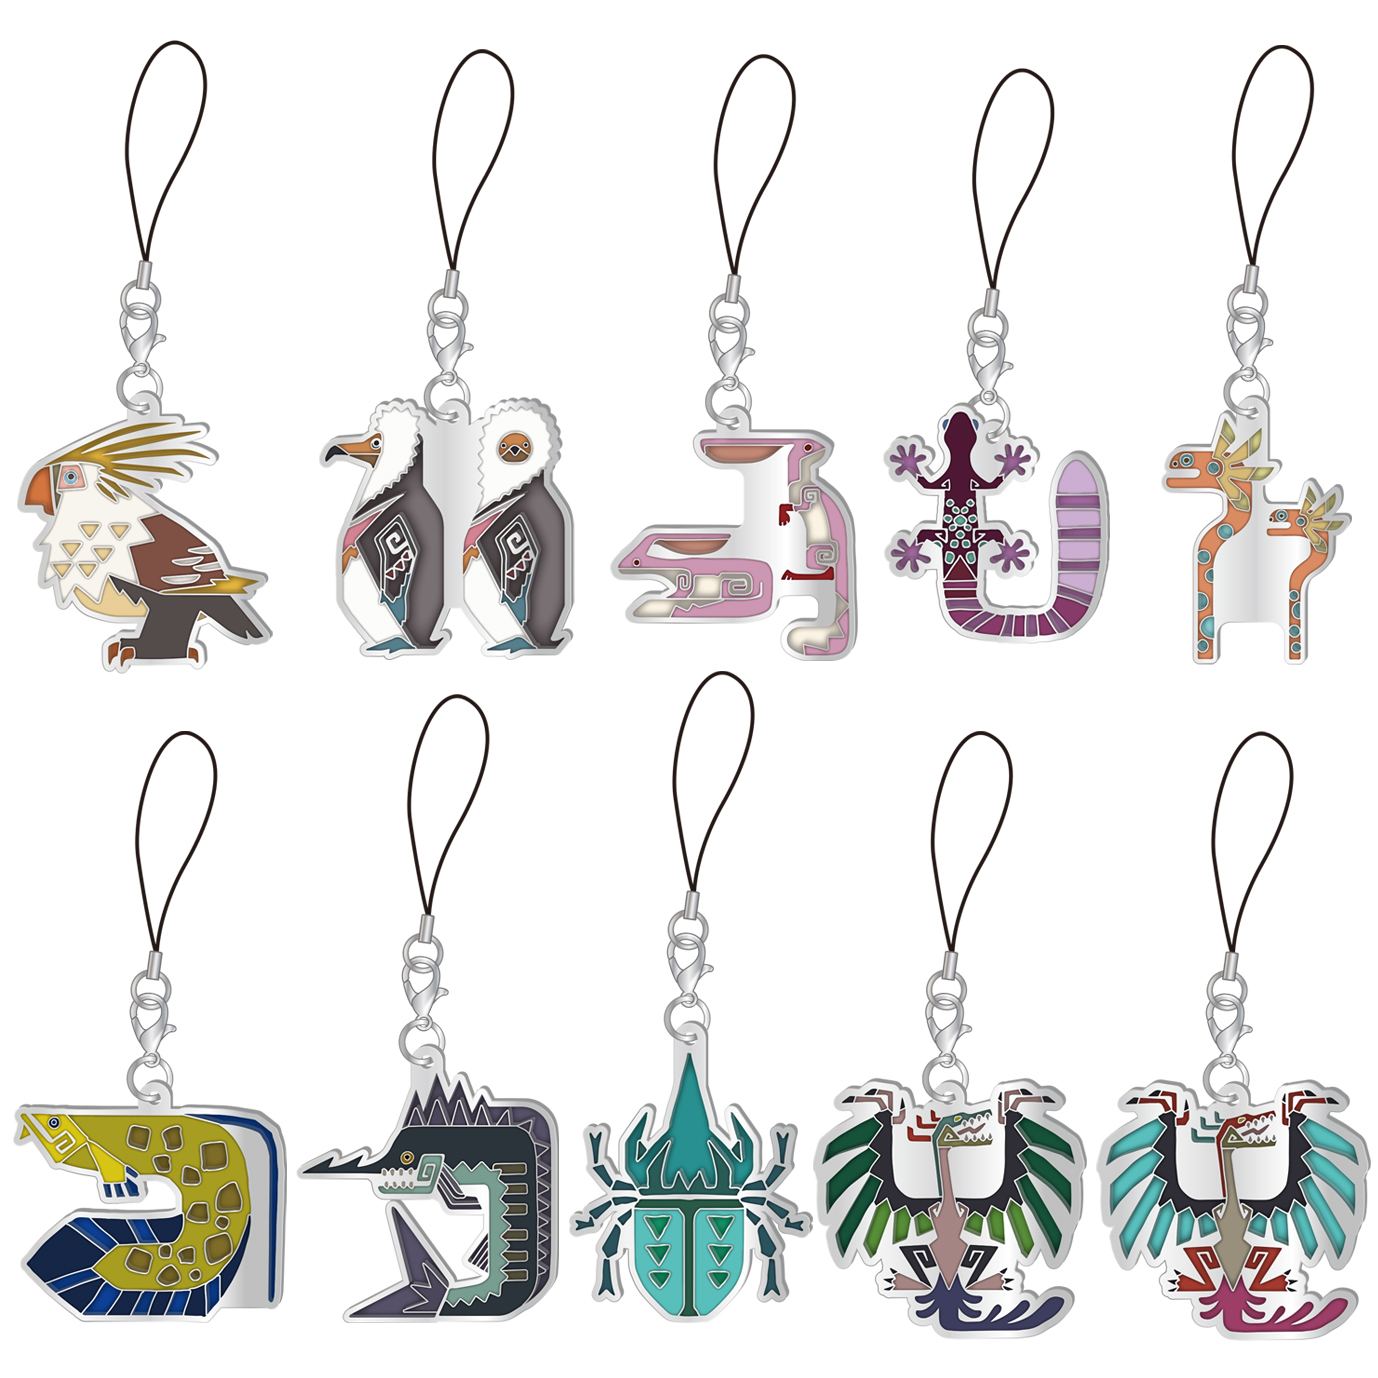 MONSTER HUNTER WORLD: ICEBORNE ENVIRONMENTAL ORGANISMS ICON STAINED GLASS TYPE MASCOT COLLECTION VOL. 2 (SET OF 10 PIECES) Capcom